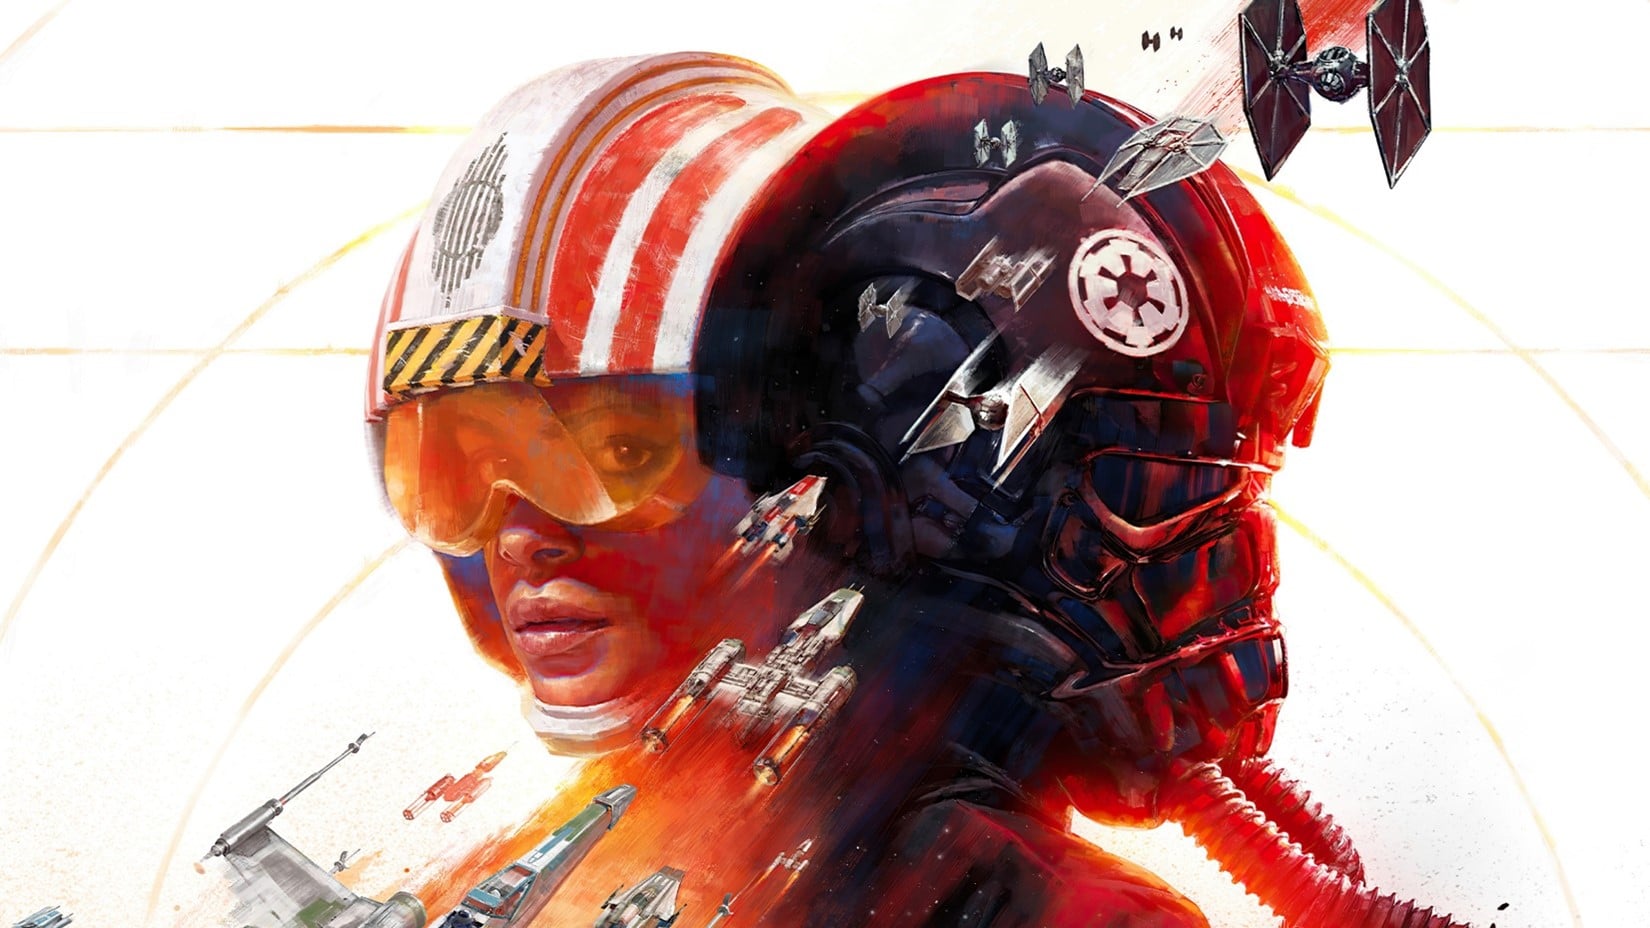 Star Wars Squadrons 2.0 Update is Here